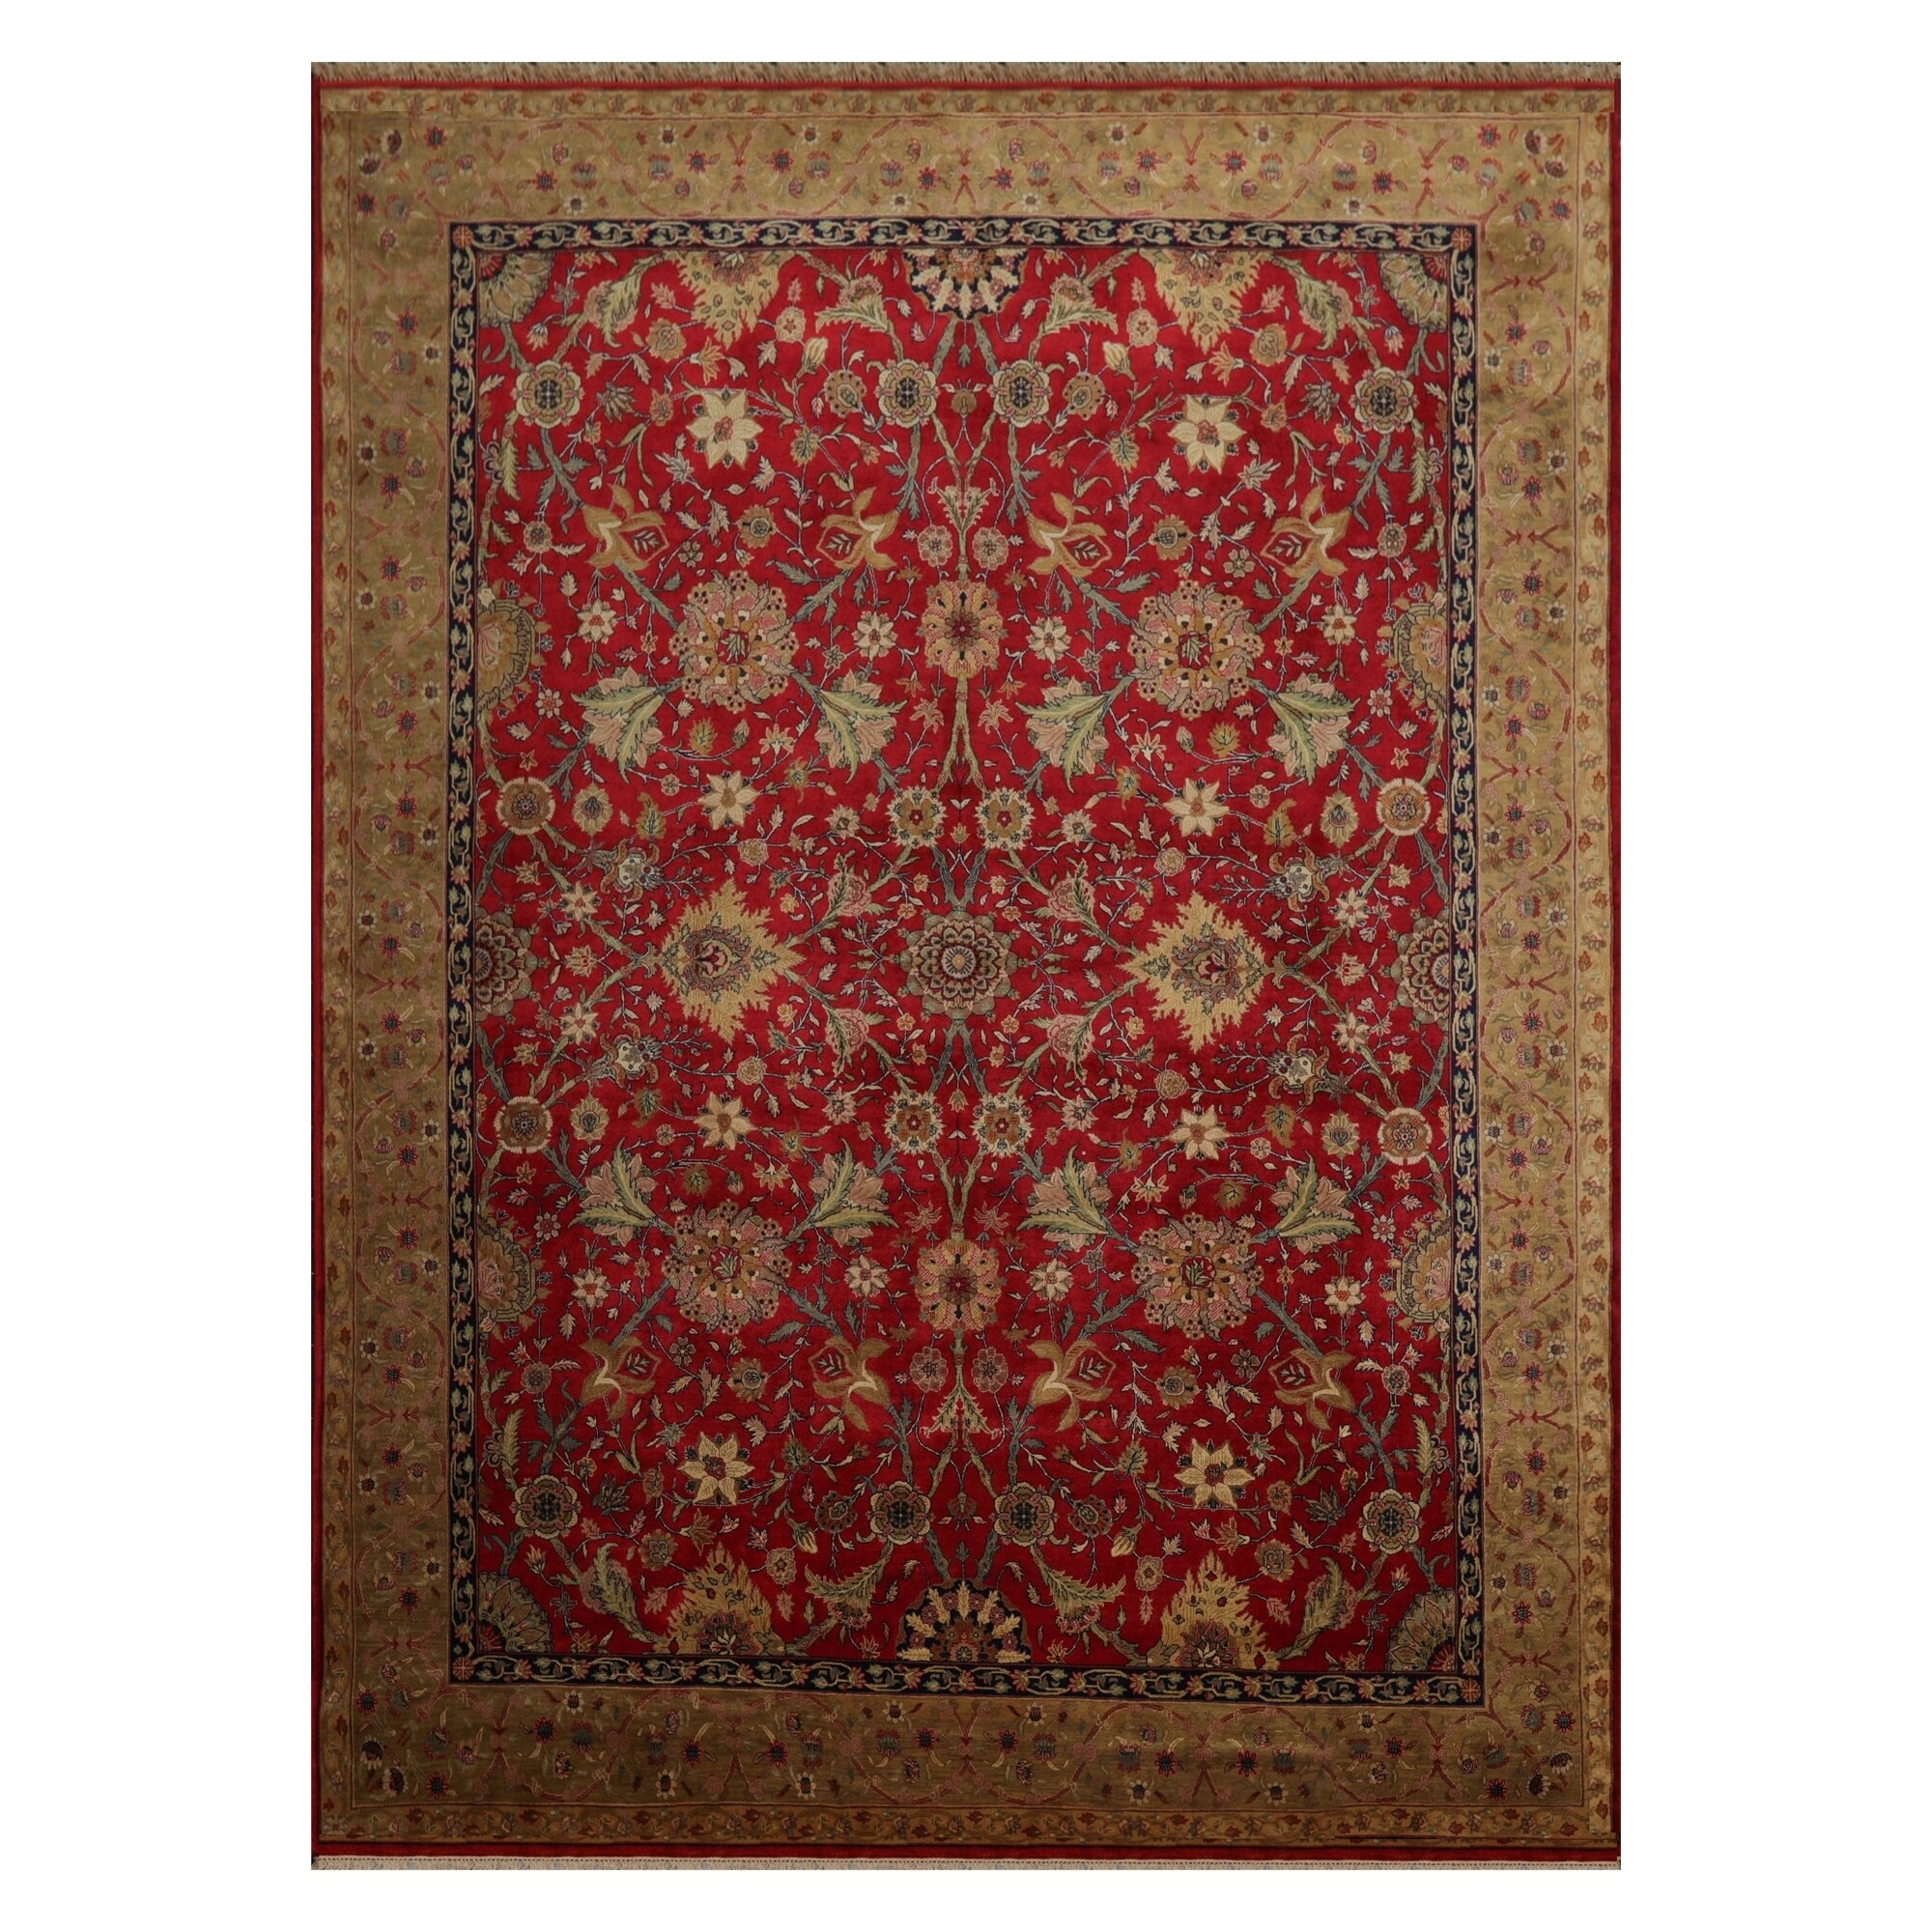 Bedroom eCarpet Gallery Large Area Rug for Living Room Pako Persian 18/20 Bordered Red Rug 8'0 x 9'3 336929 Hand-Knotted Wool Rug 